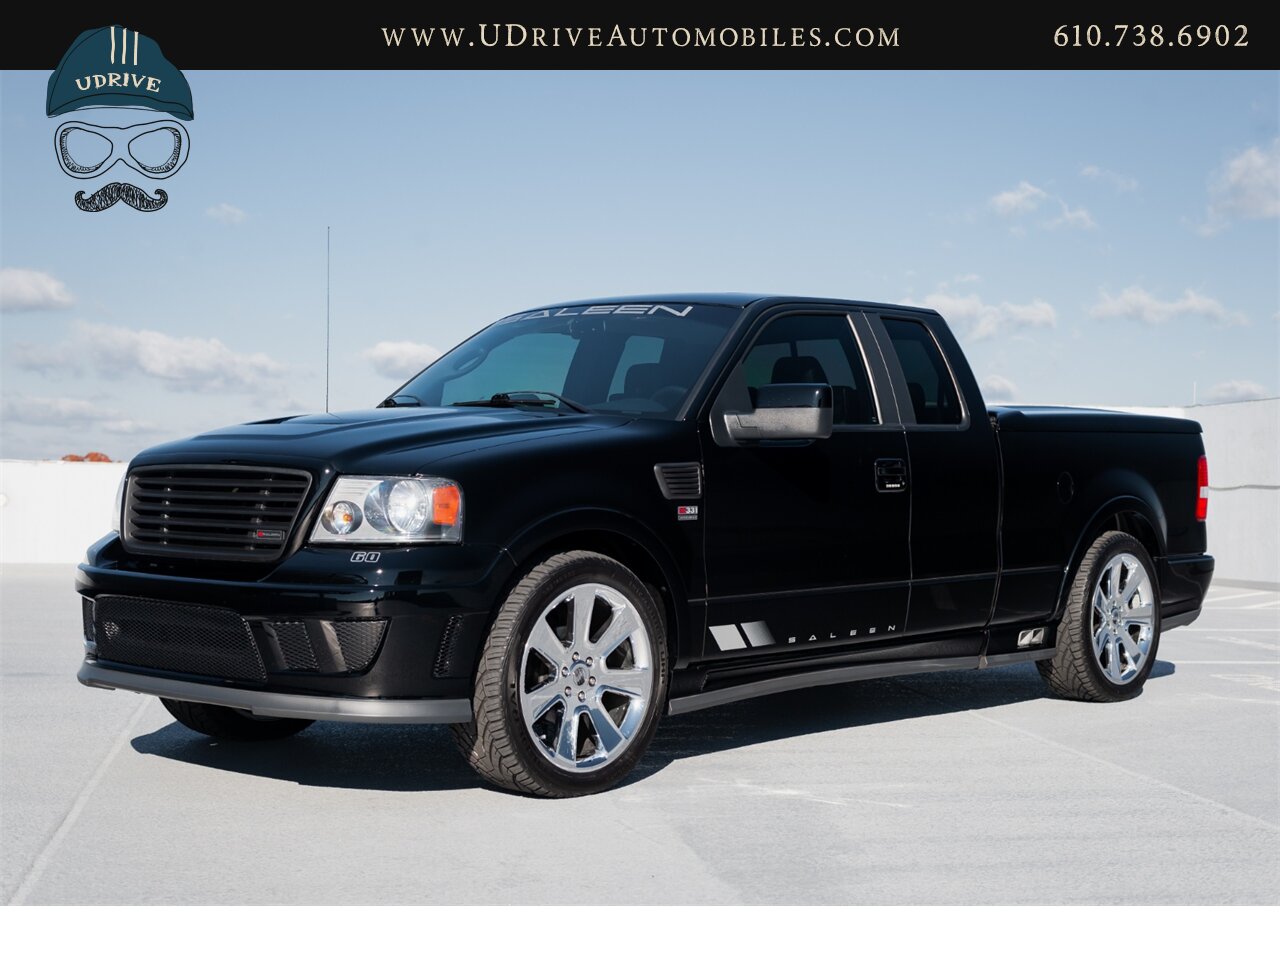 2007 Ford F-150 Saleen S331 Supercharged #60 13k Miles 450HP   - Photo 10 - West Chester, PA 19382